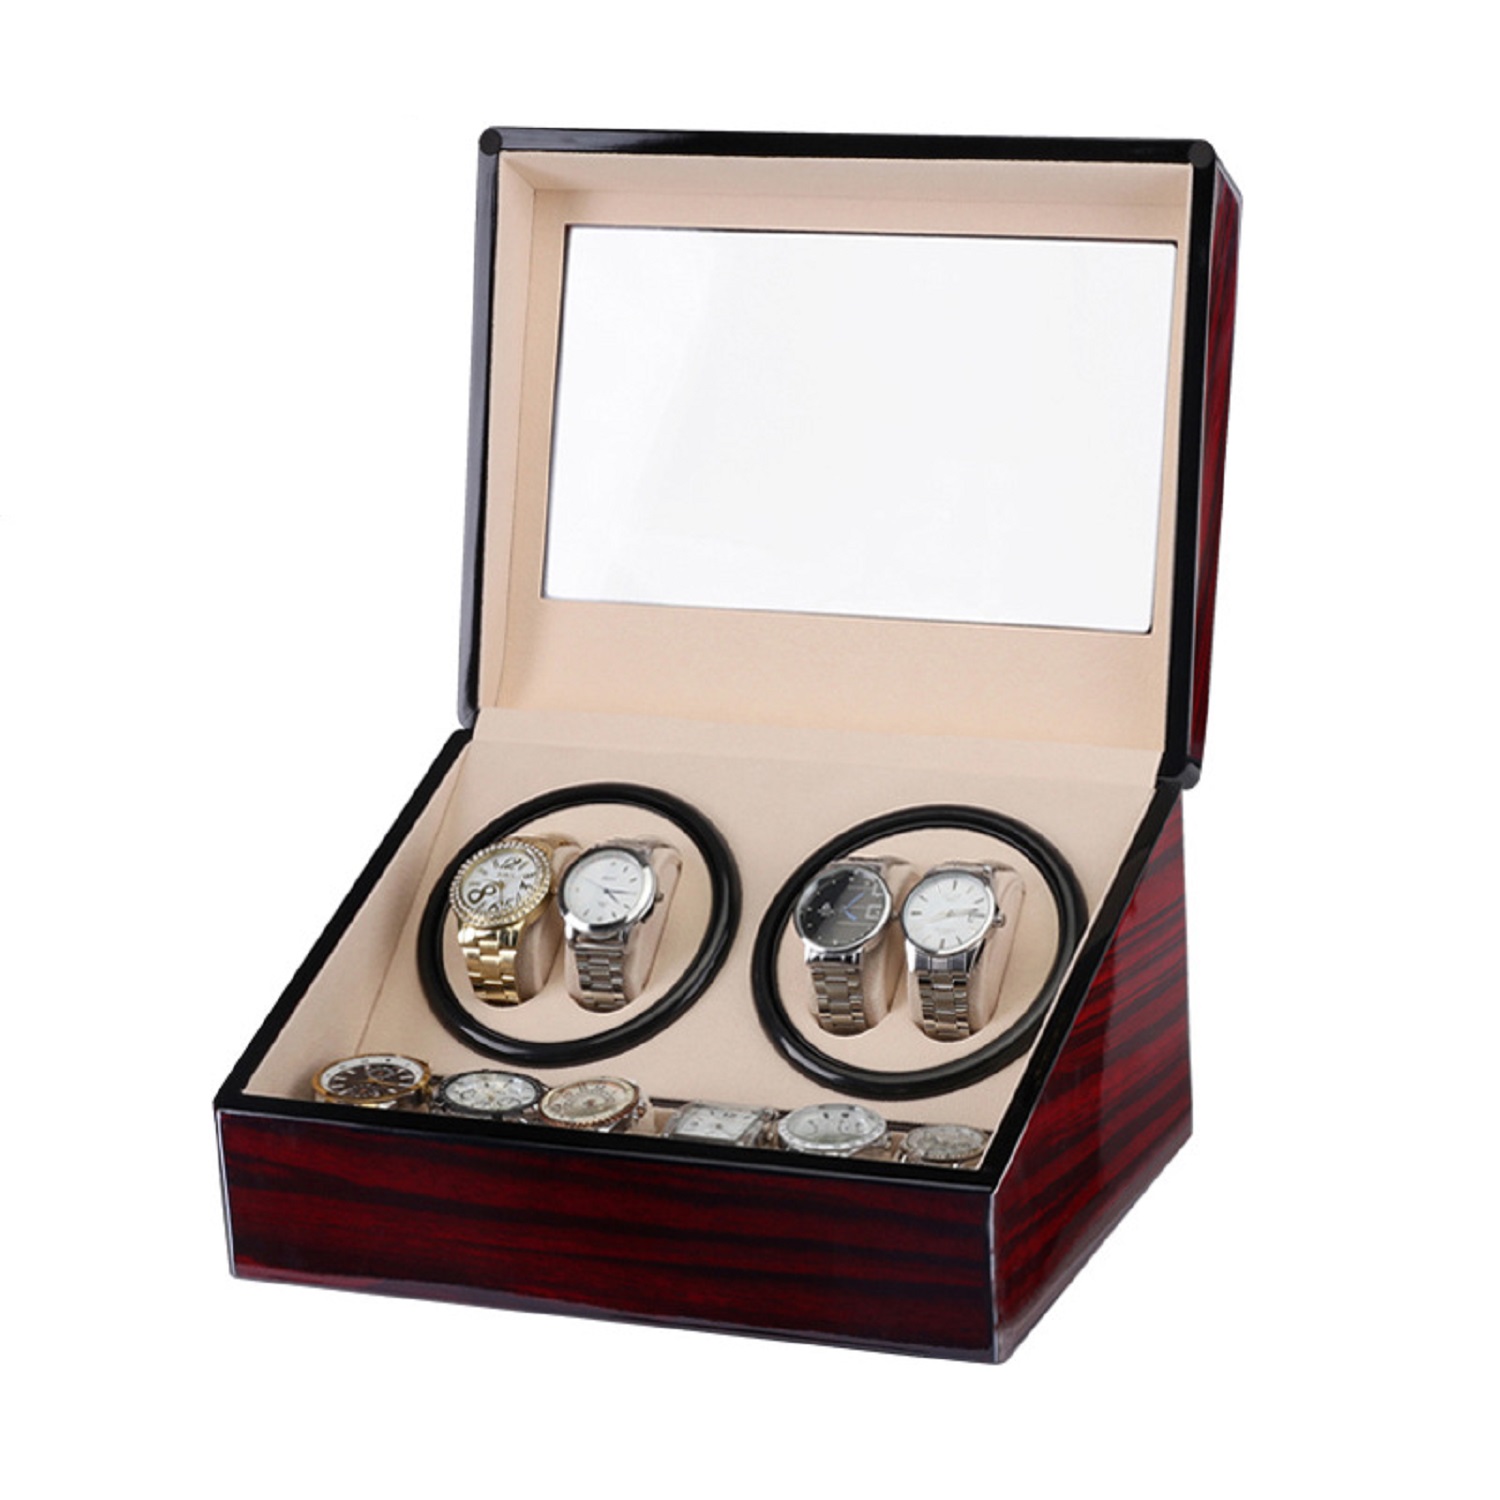 High Gloss PU Painted 4+6 Automatic Watch Winder with Watch Storage for 10 watches